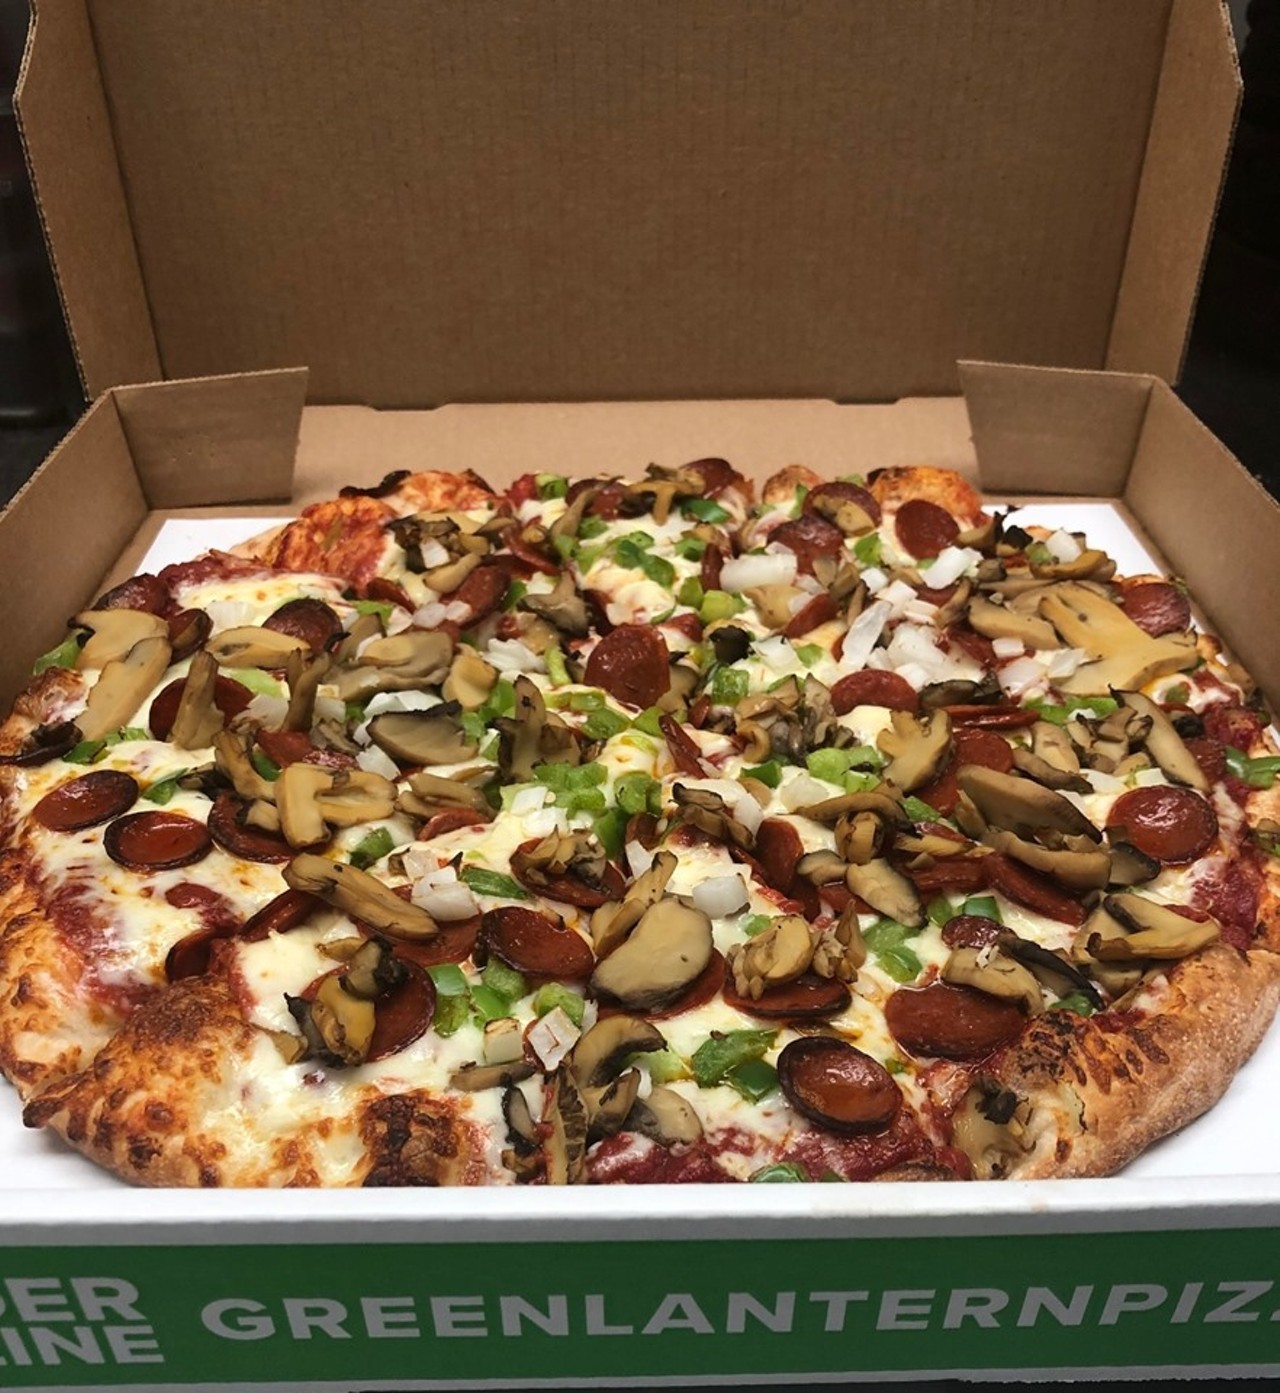 Green Lantern Pizza
4033 W. 12 Mile Rd, Berkley; 248-951-9292; greenlanternpizza.com
Metro Detroit mini-chain Green Lantern Pizza's seventh location opened in Berkley this year. The 5,200-square-foot restaurant has a full bar and a menu similar to that at the 15 Mile Road flagship location in Clinton Township. It is Green Lantern's third sit-down location, and the company expects to add more franchised carryout stores in the future. Green Lantern offers gourmet pizzas, subs, sandwiches, and salads.
Photo via Green Lantern Pizza / Facebook